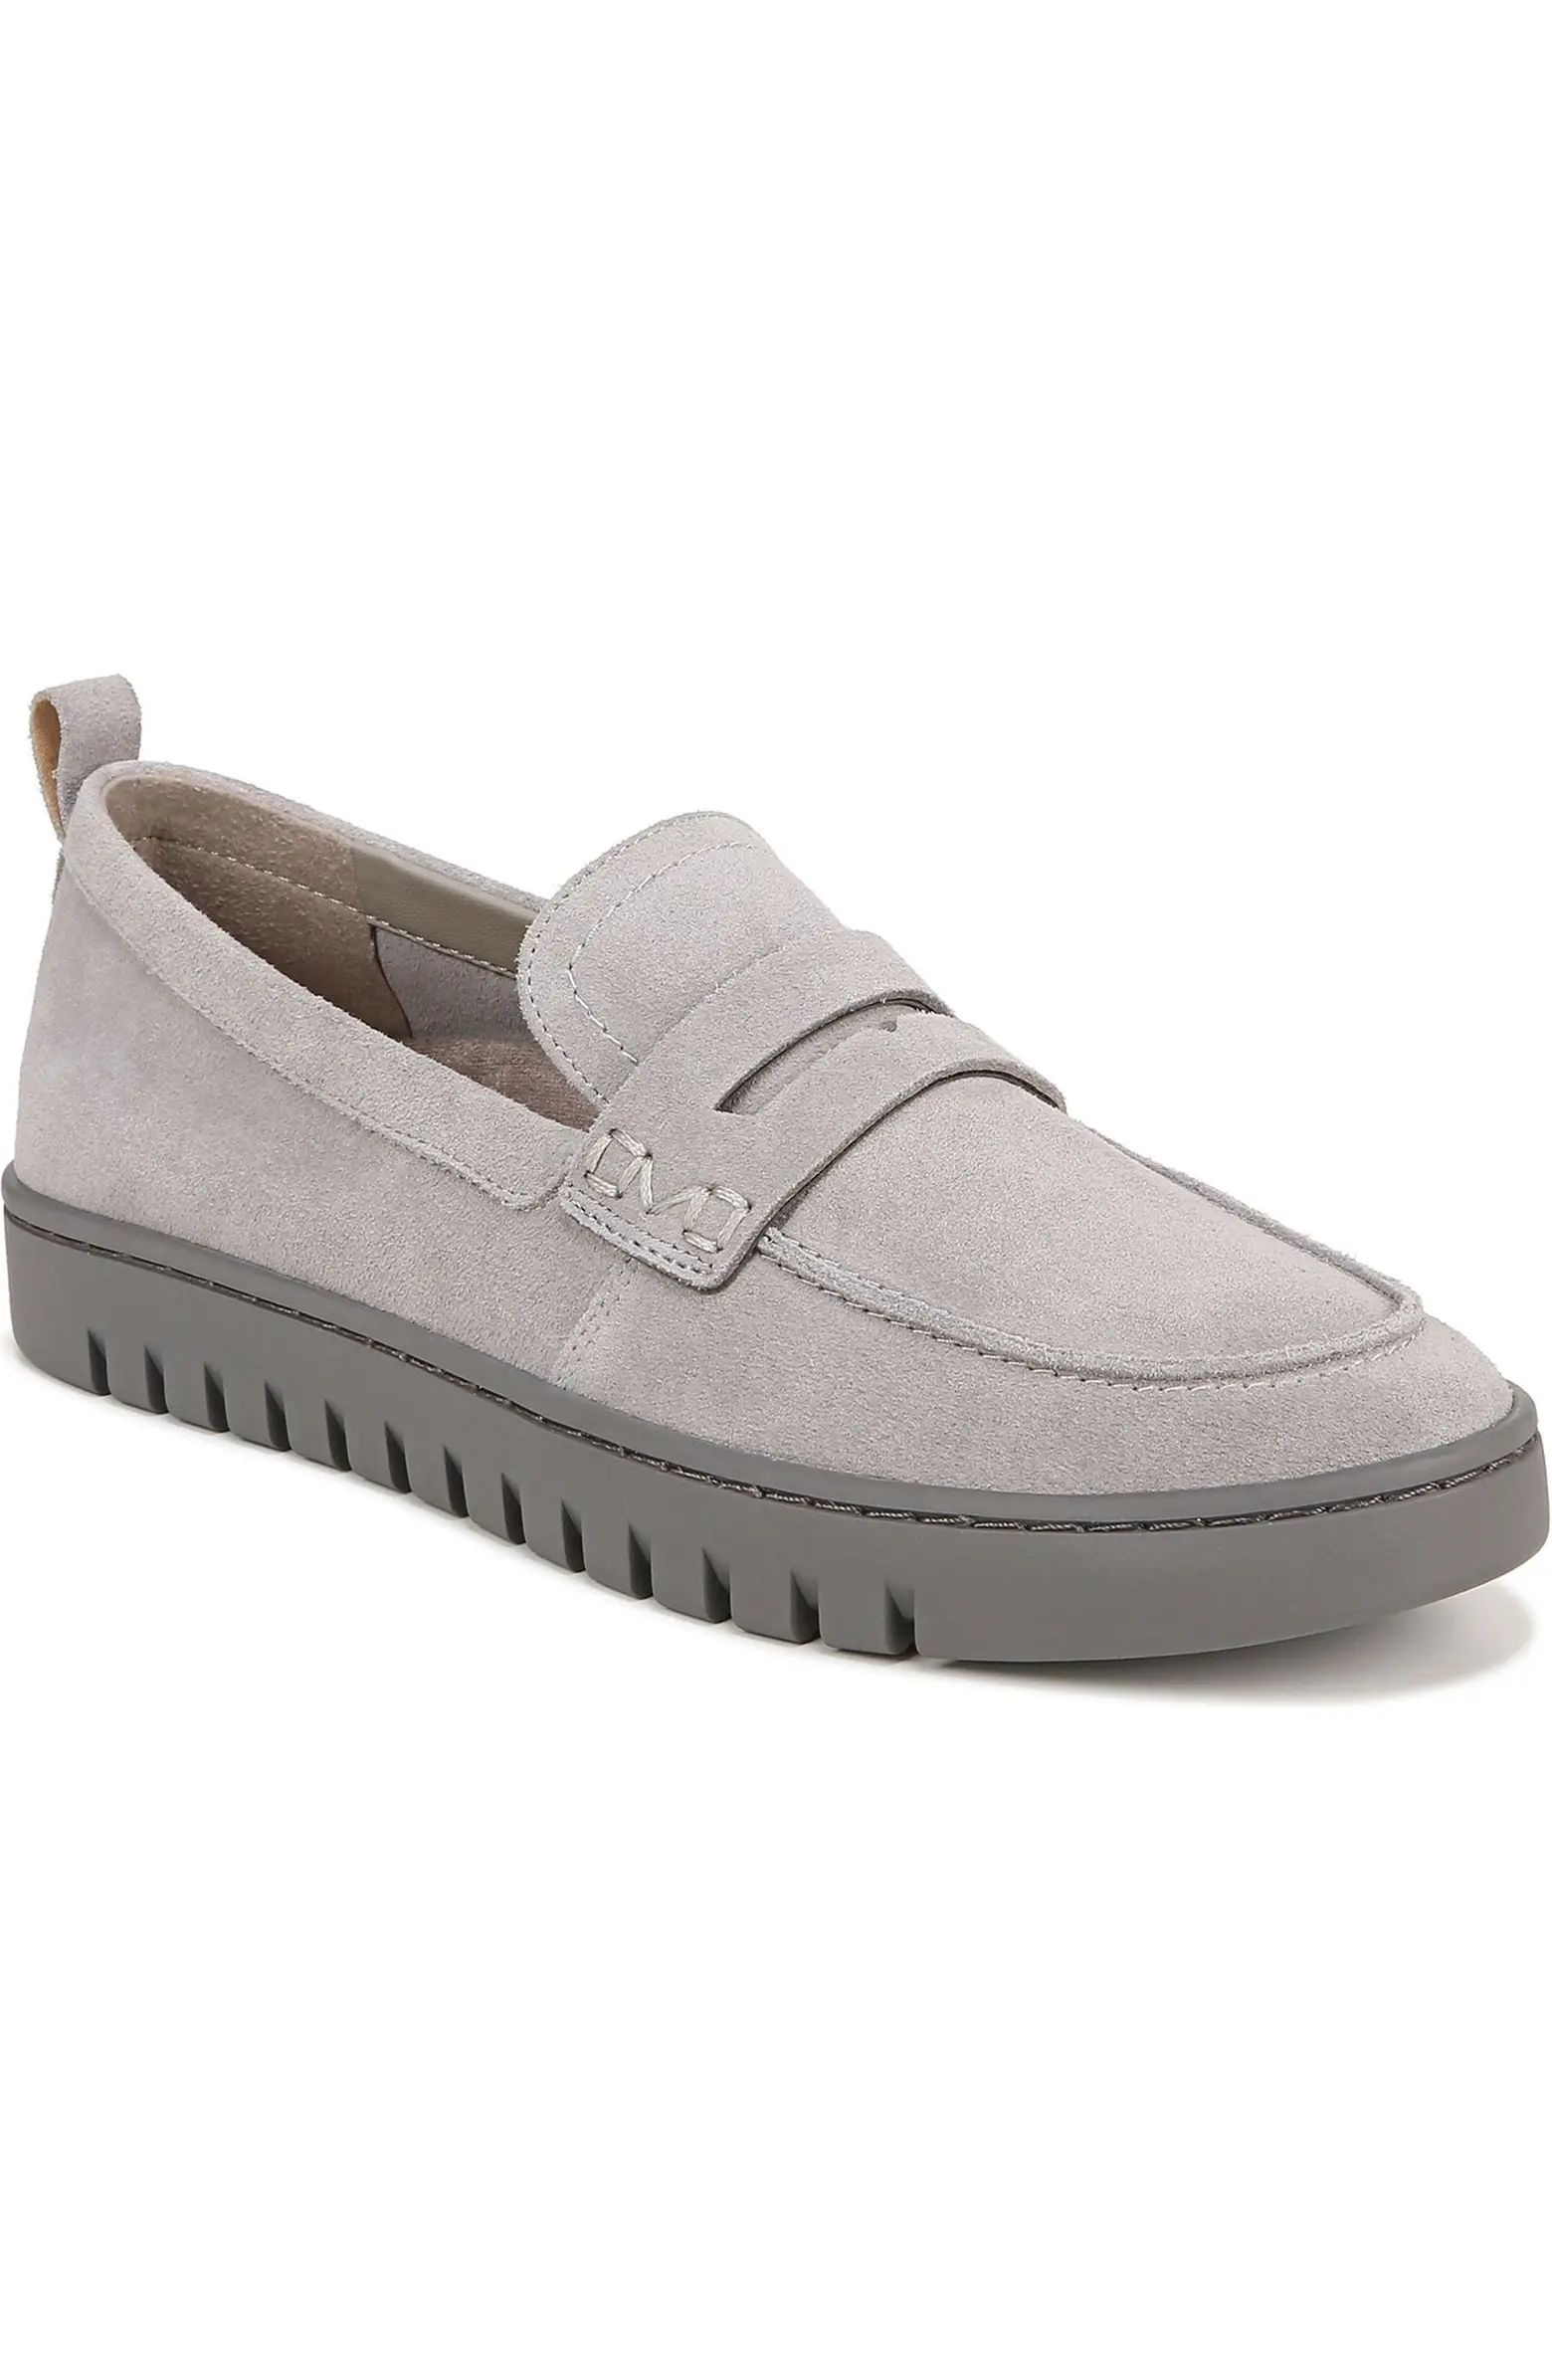 Uptown Hybrid Penny Loafer (Women) - Wide Width Available | Nordstrom